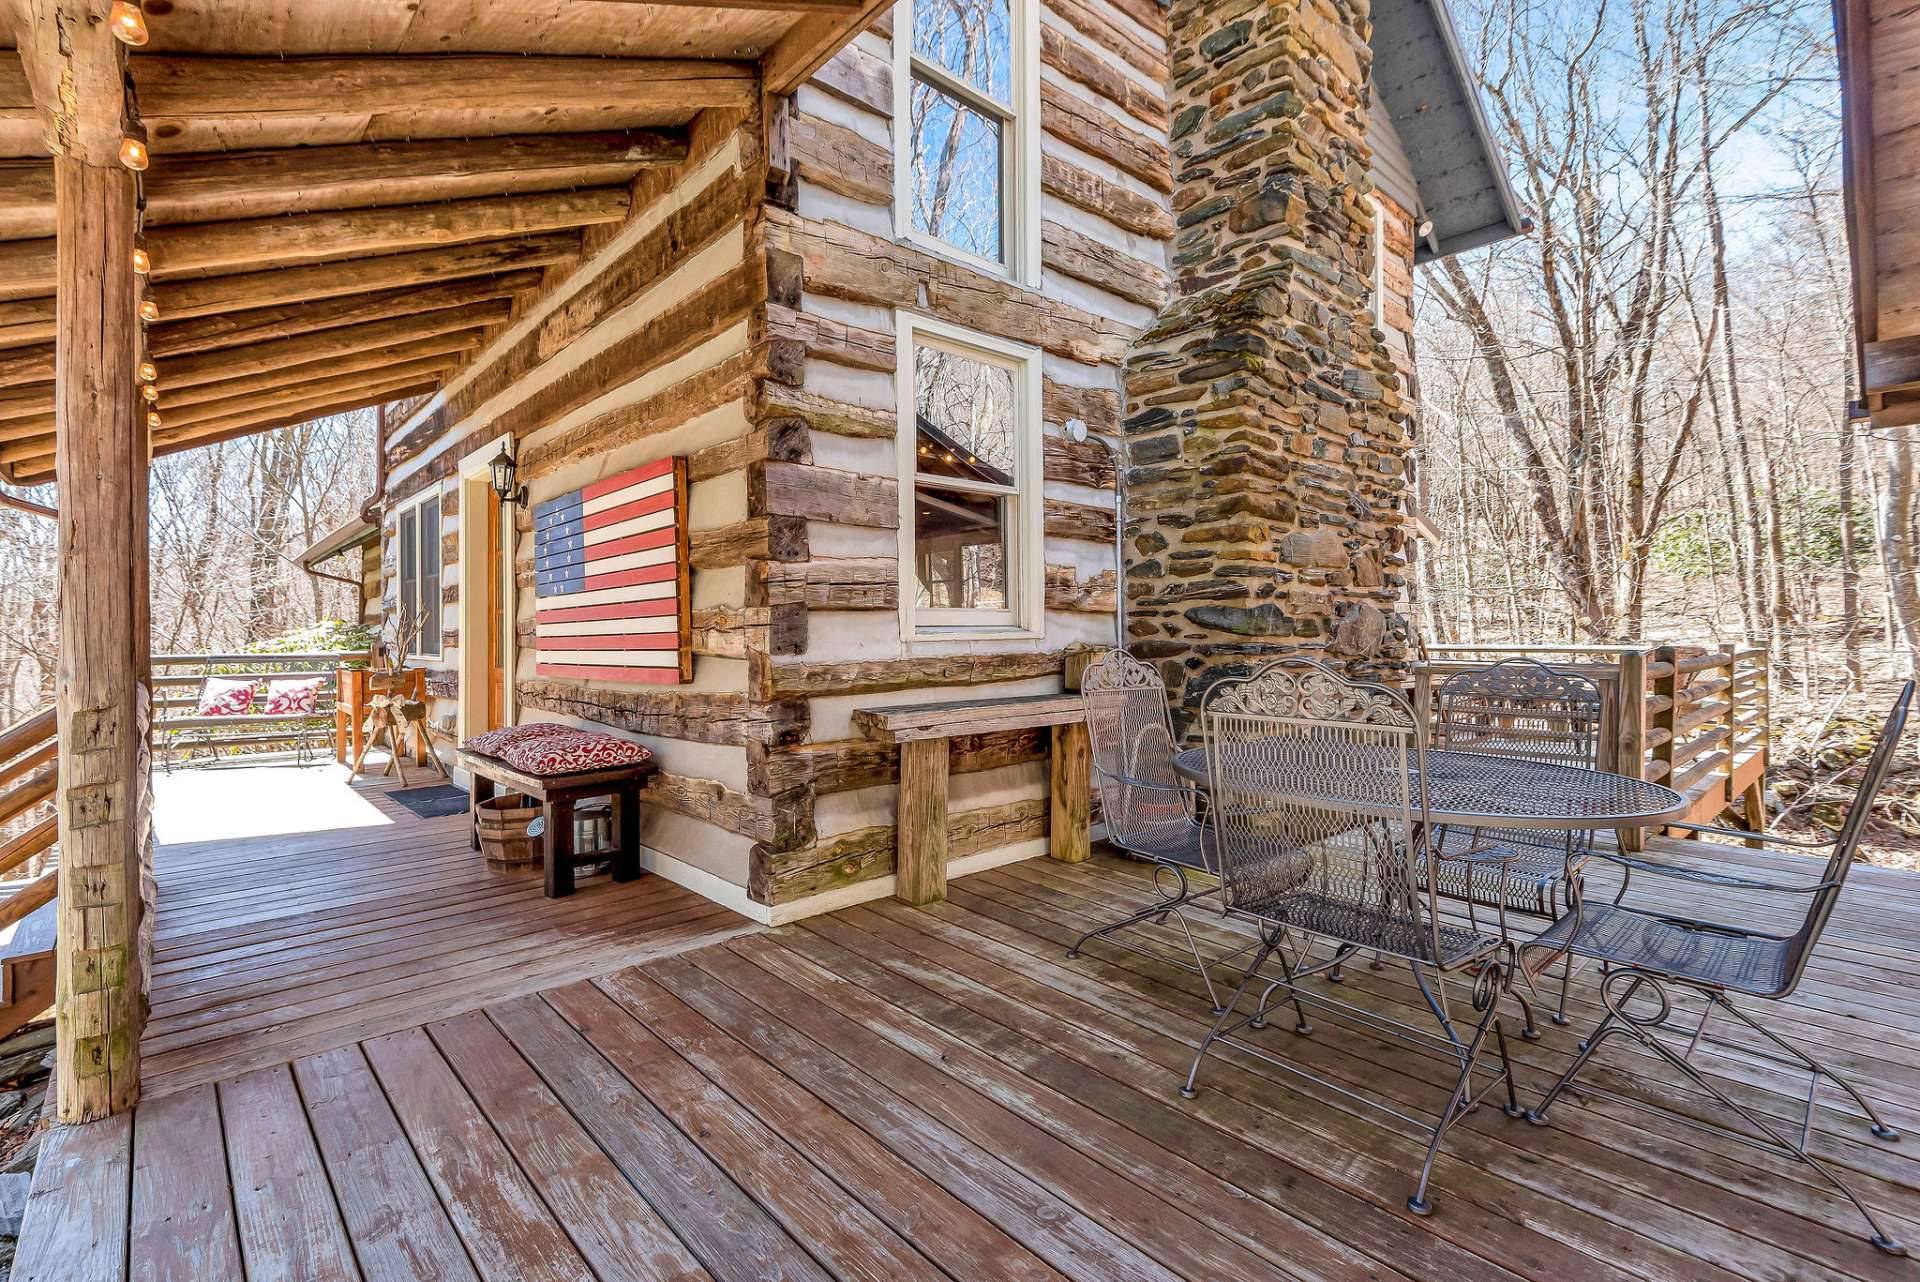 This cabin's expansive deck spaces offer the ultimate sanctuary for relaxation or entertaining.